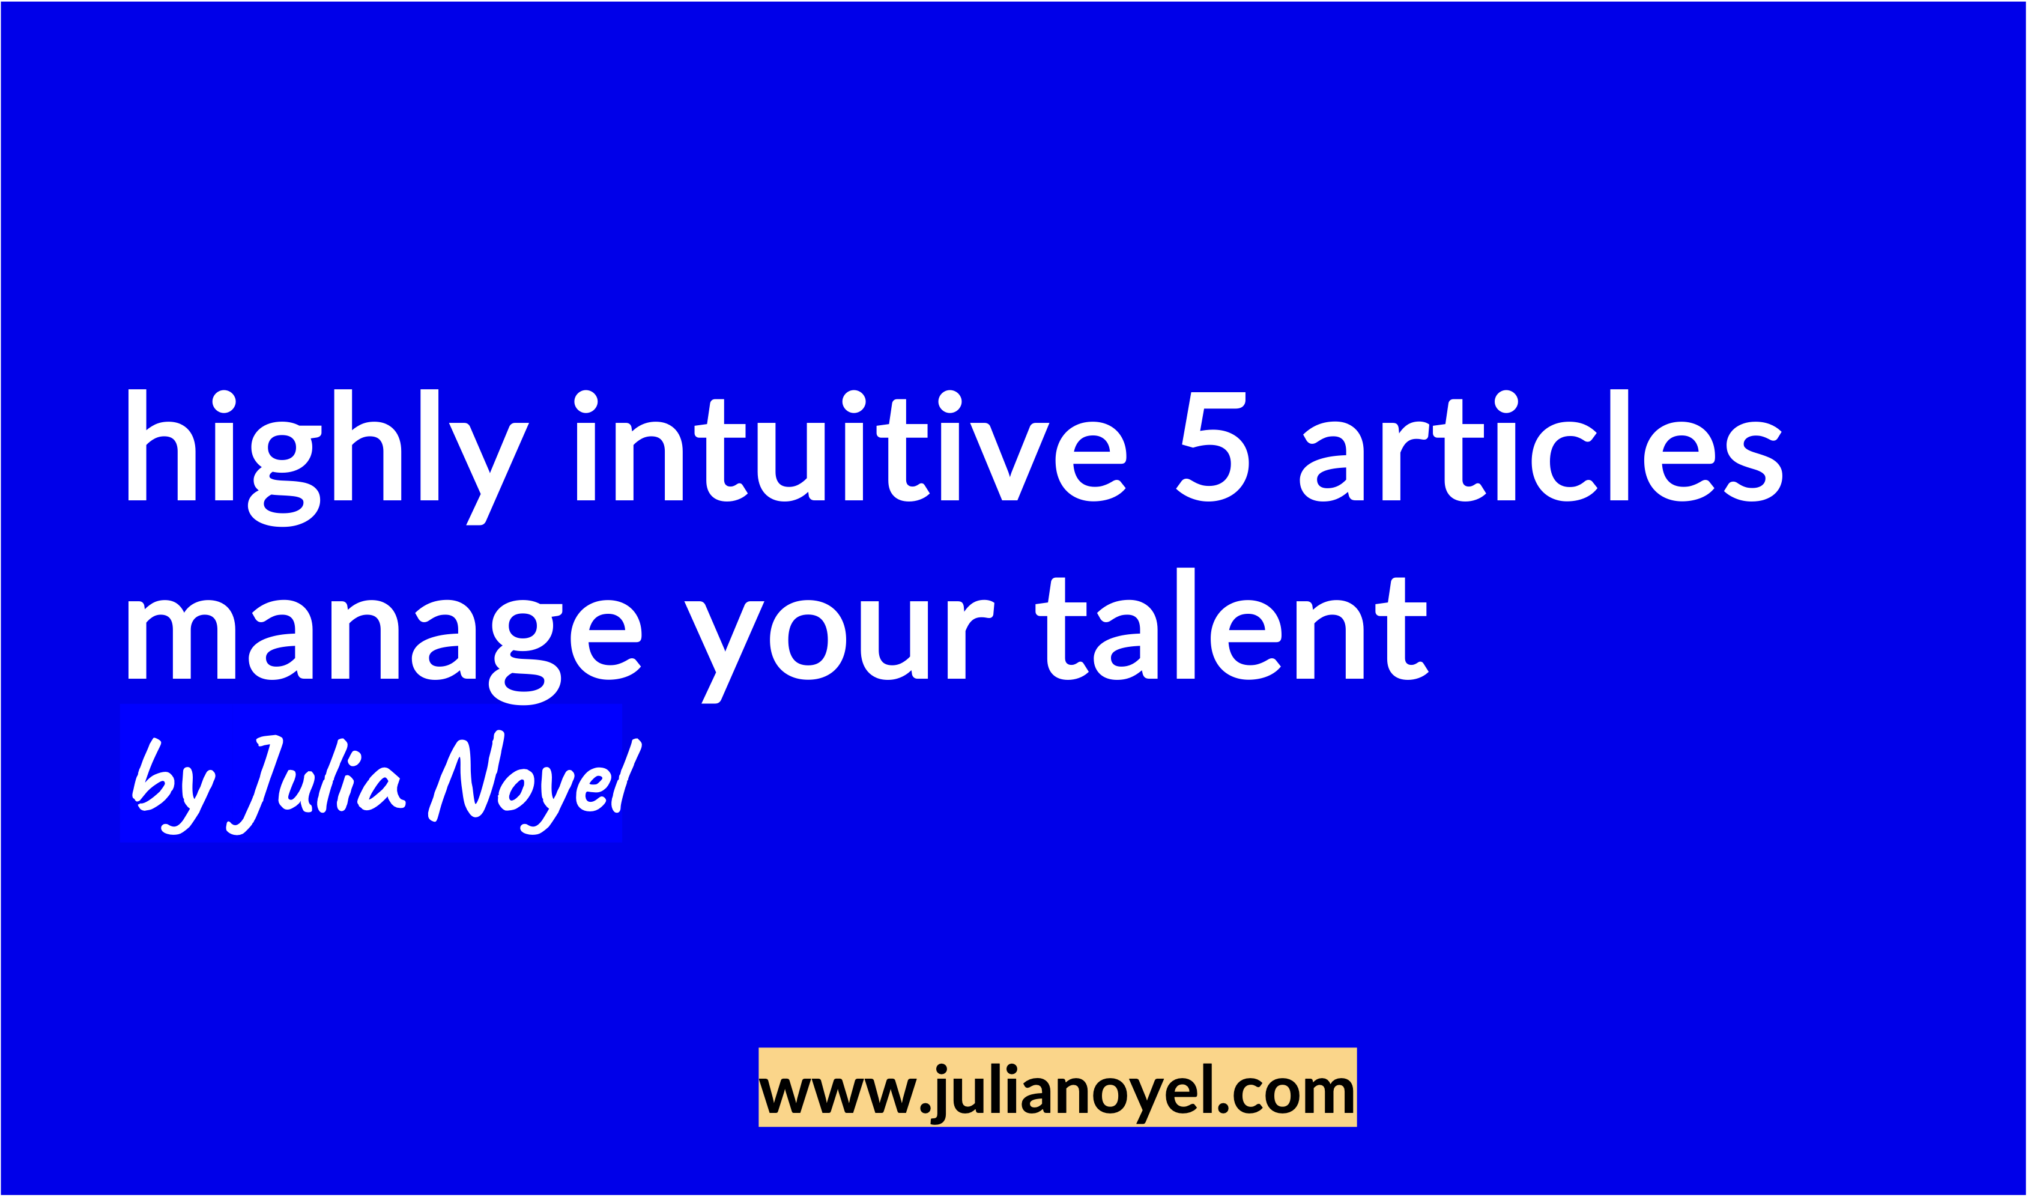 highly intuitive 5 articles manage your talent by Julia Noyel